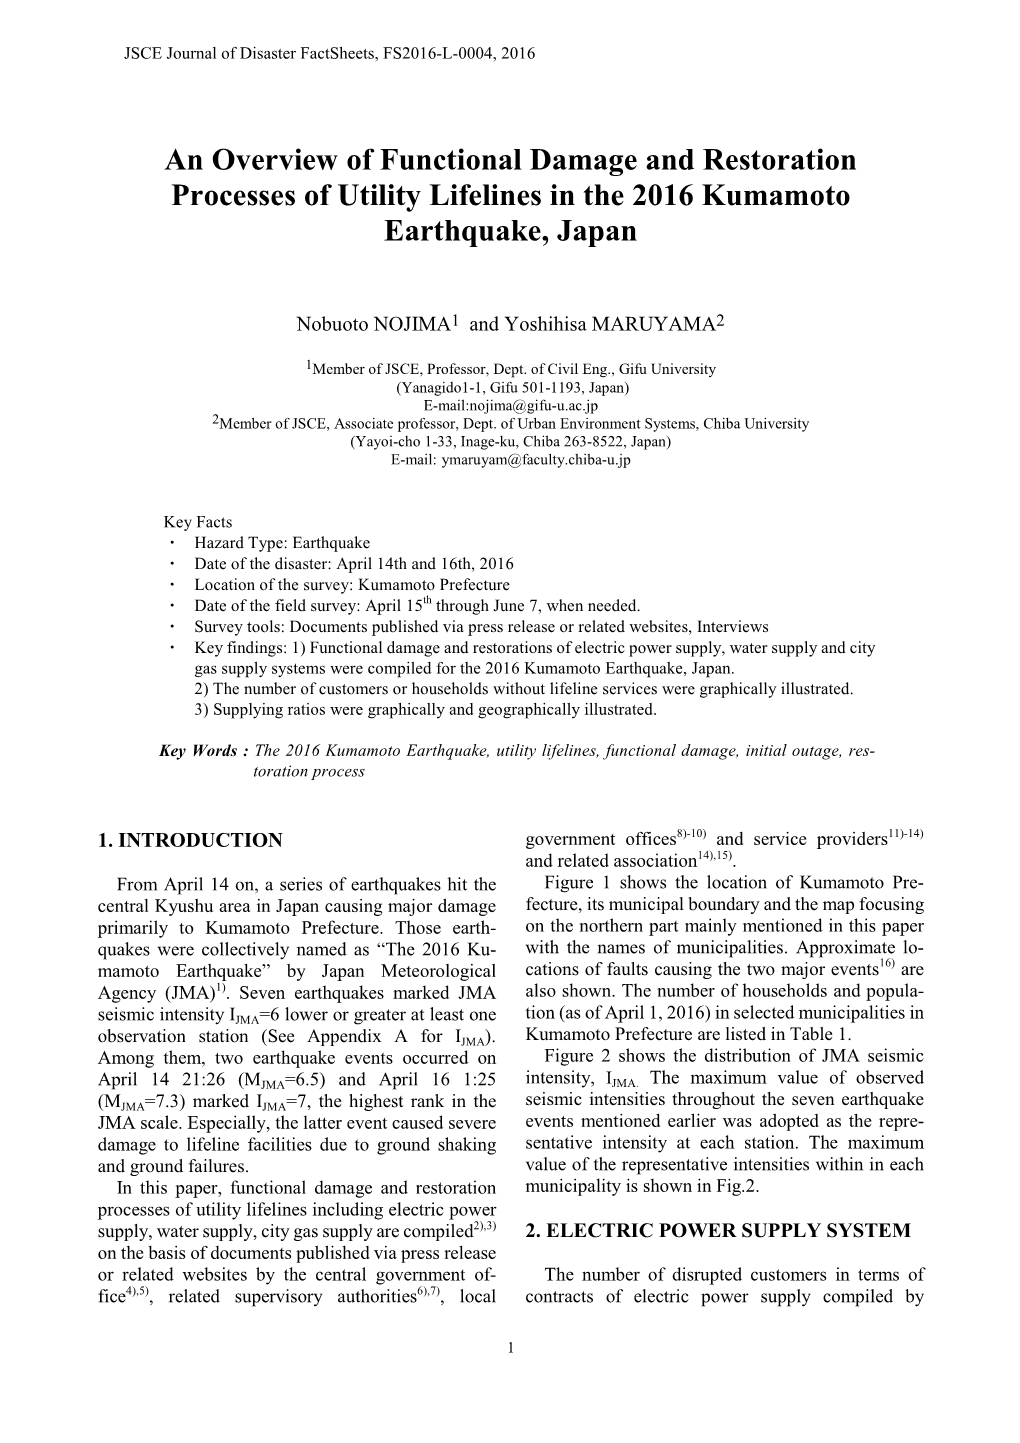 An Overview of Functional Damage and Restoration Processes of Utility Lifelines in the 2016 Kumamoto Earthquake, Japan